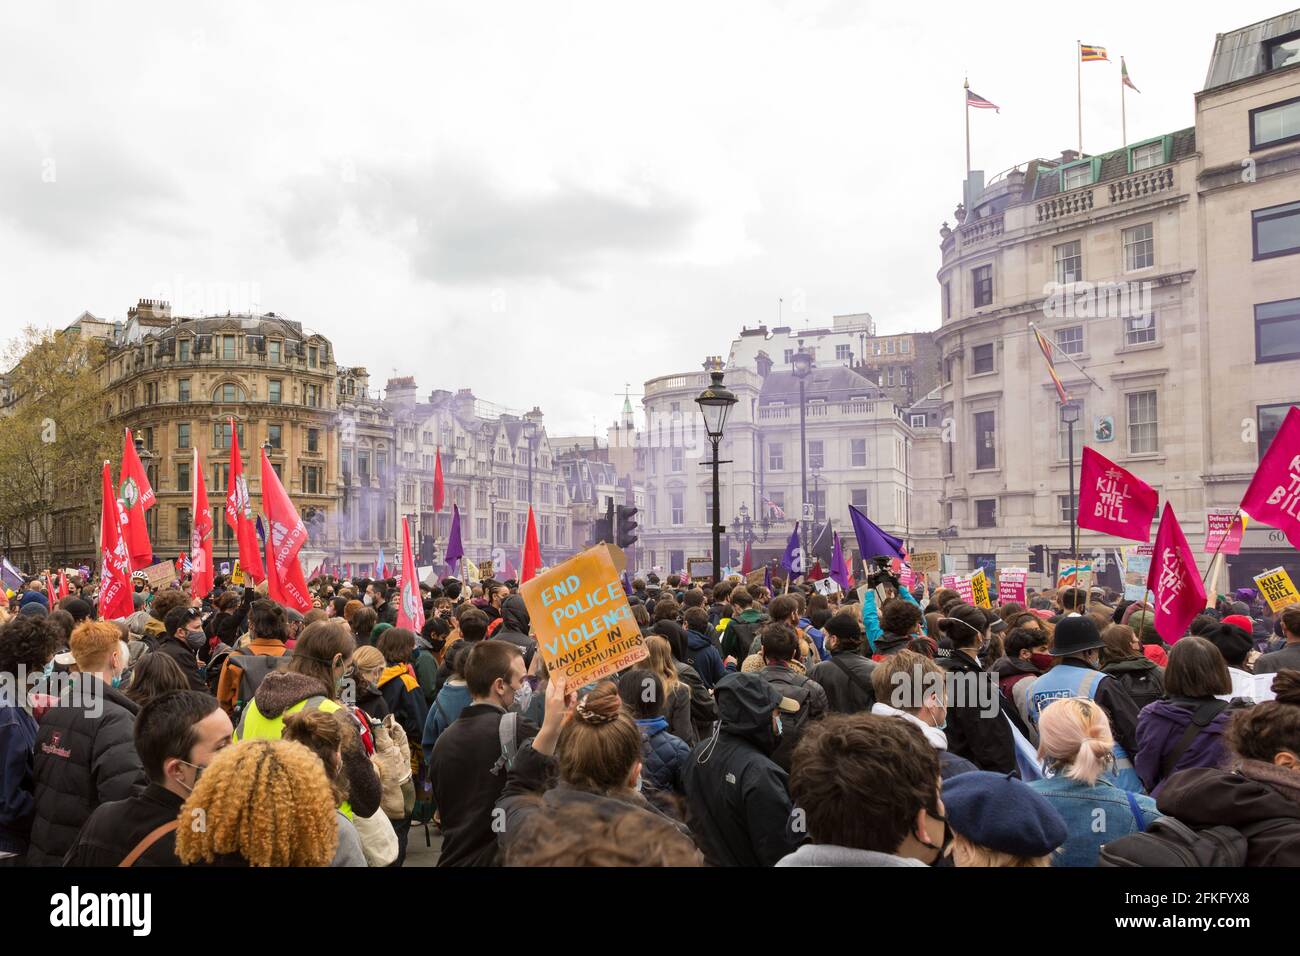 Purple gas is released as the protestors marched from Trafalgar Square, during the Mayday 'Kill the Bill' protests against police brutality and budget, and the Policing and Crime Bill. (Photo by Belinda Jiao / SOPA Images/Sipa USA) Stock Photo